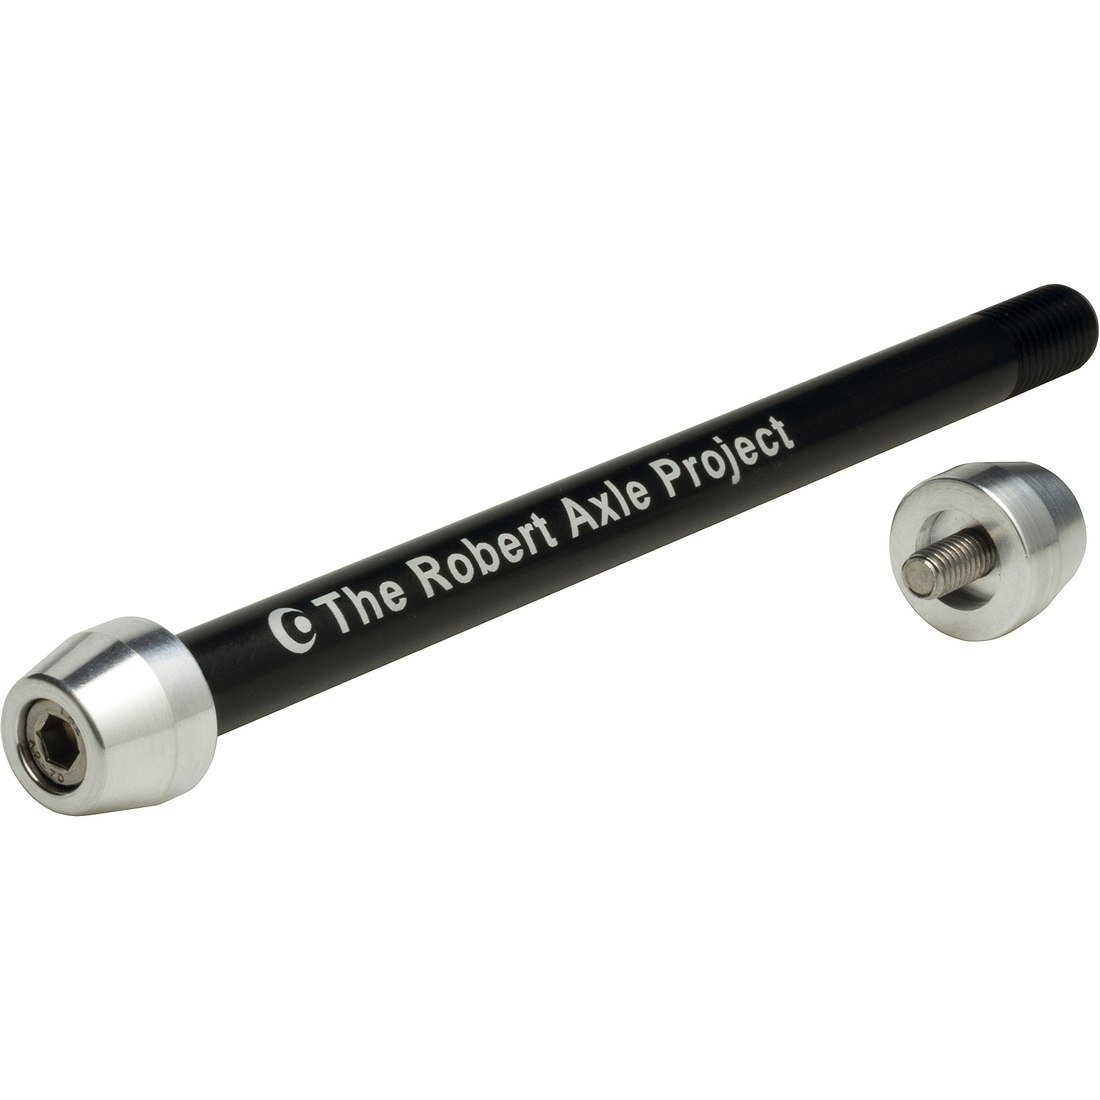 Productfoto van The Robert Axle Project - Thru Axle for Bike Trainers - 12x142/148mm - M12x1.75 167-198mm - TRA201/202/210/211/221